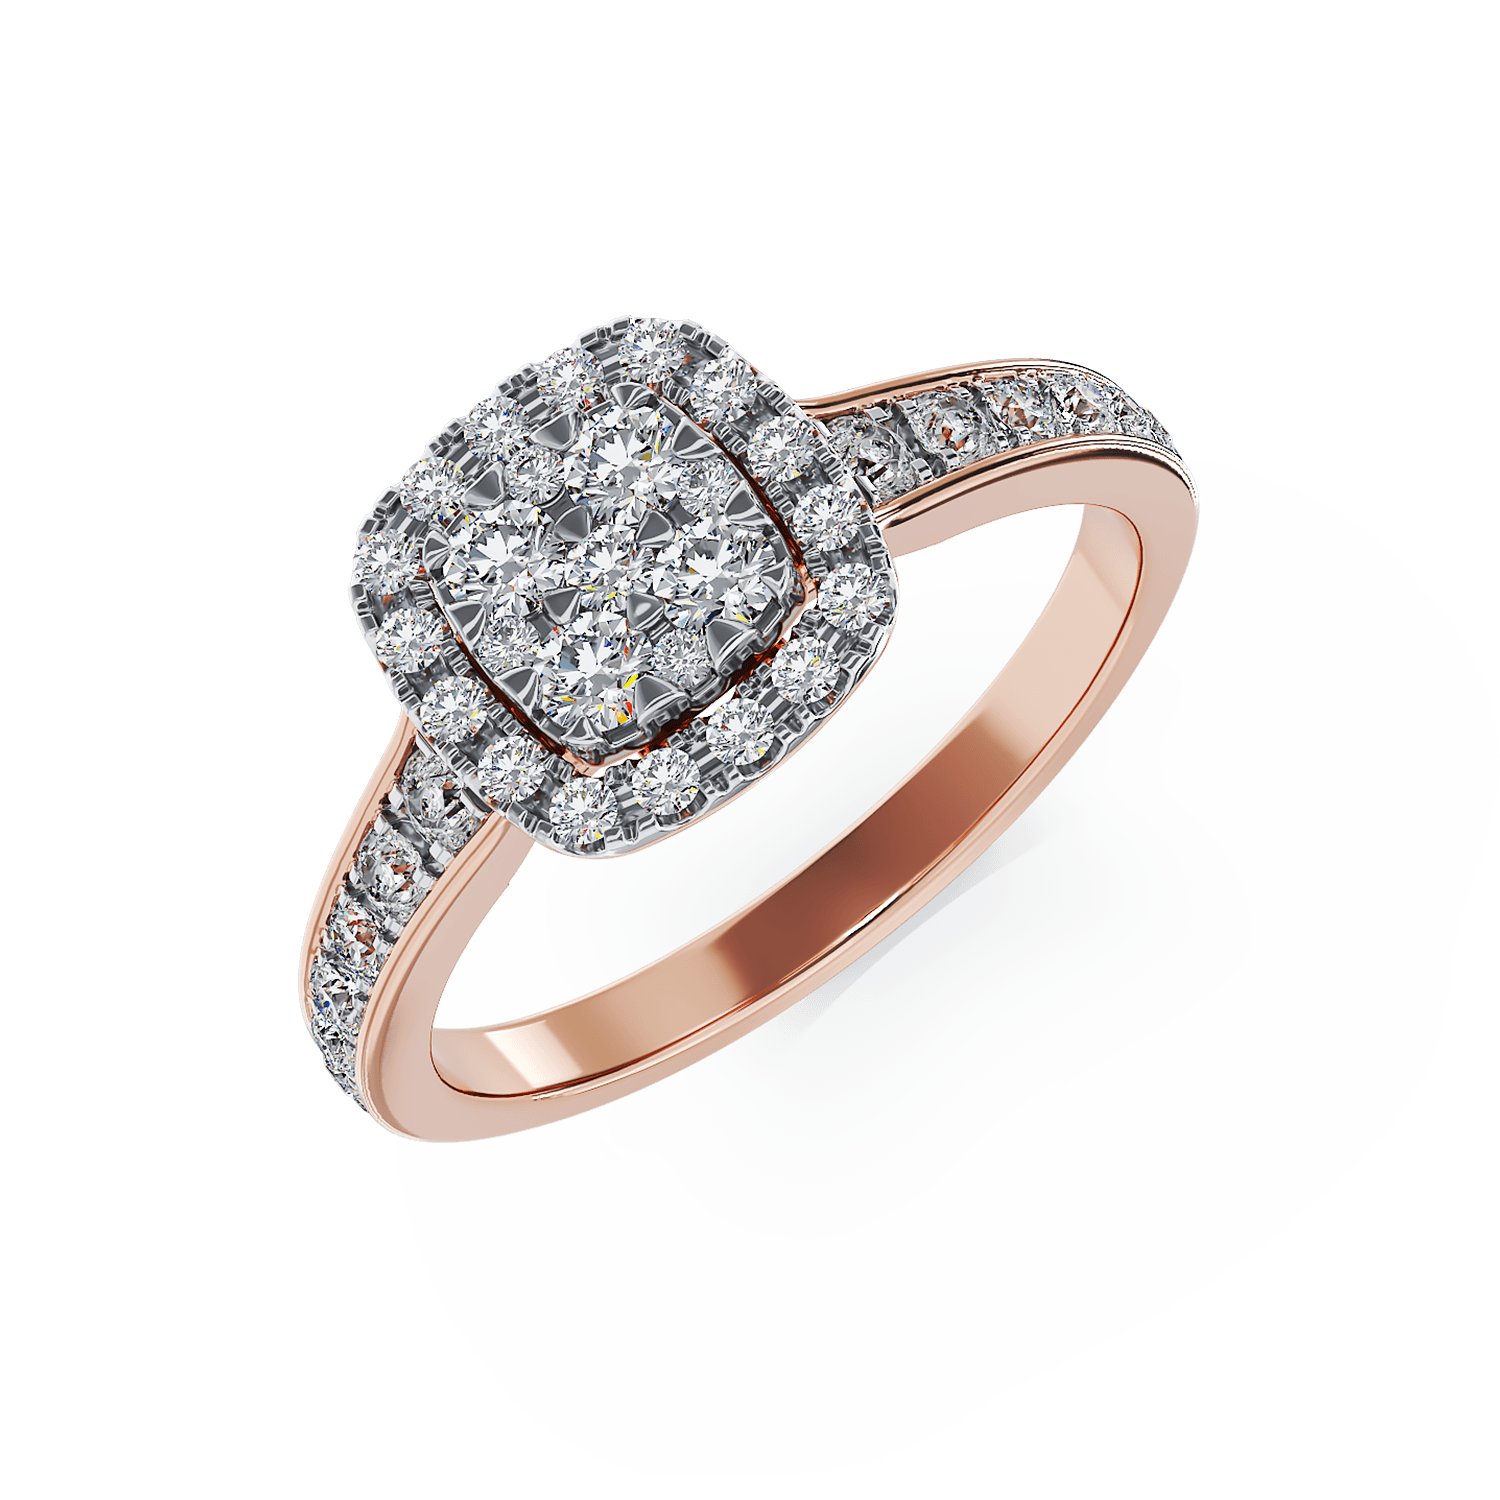 18K rose gold engagement ring with 0.52ct diamonds